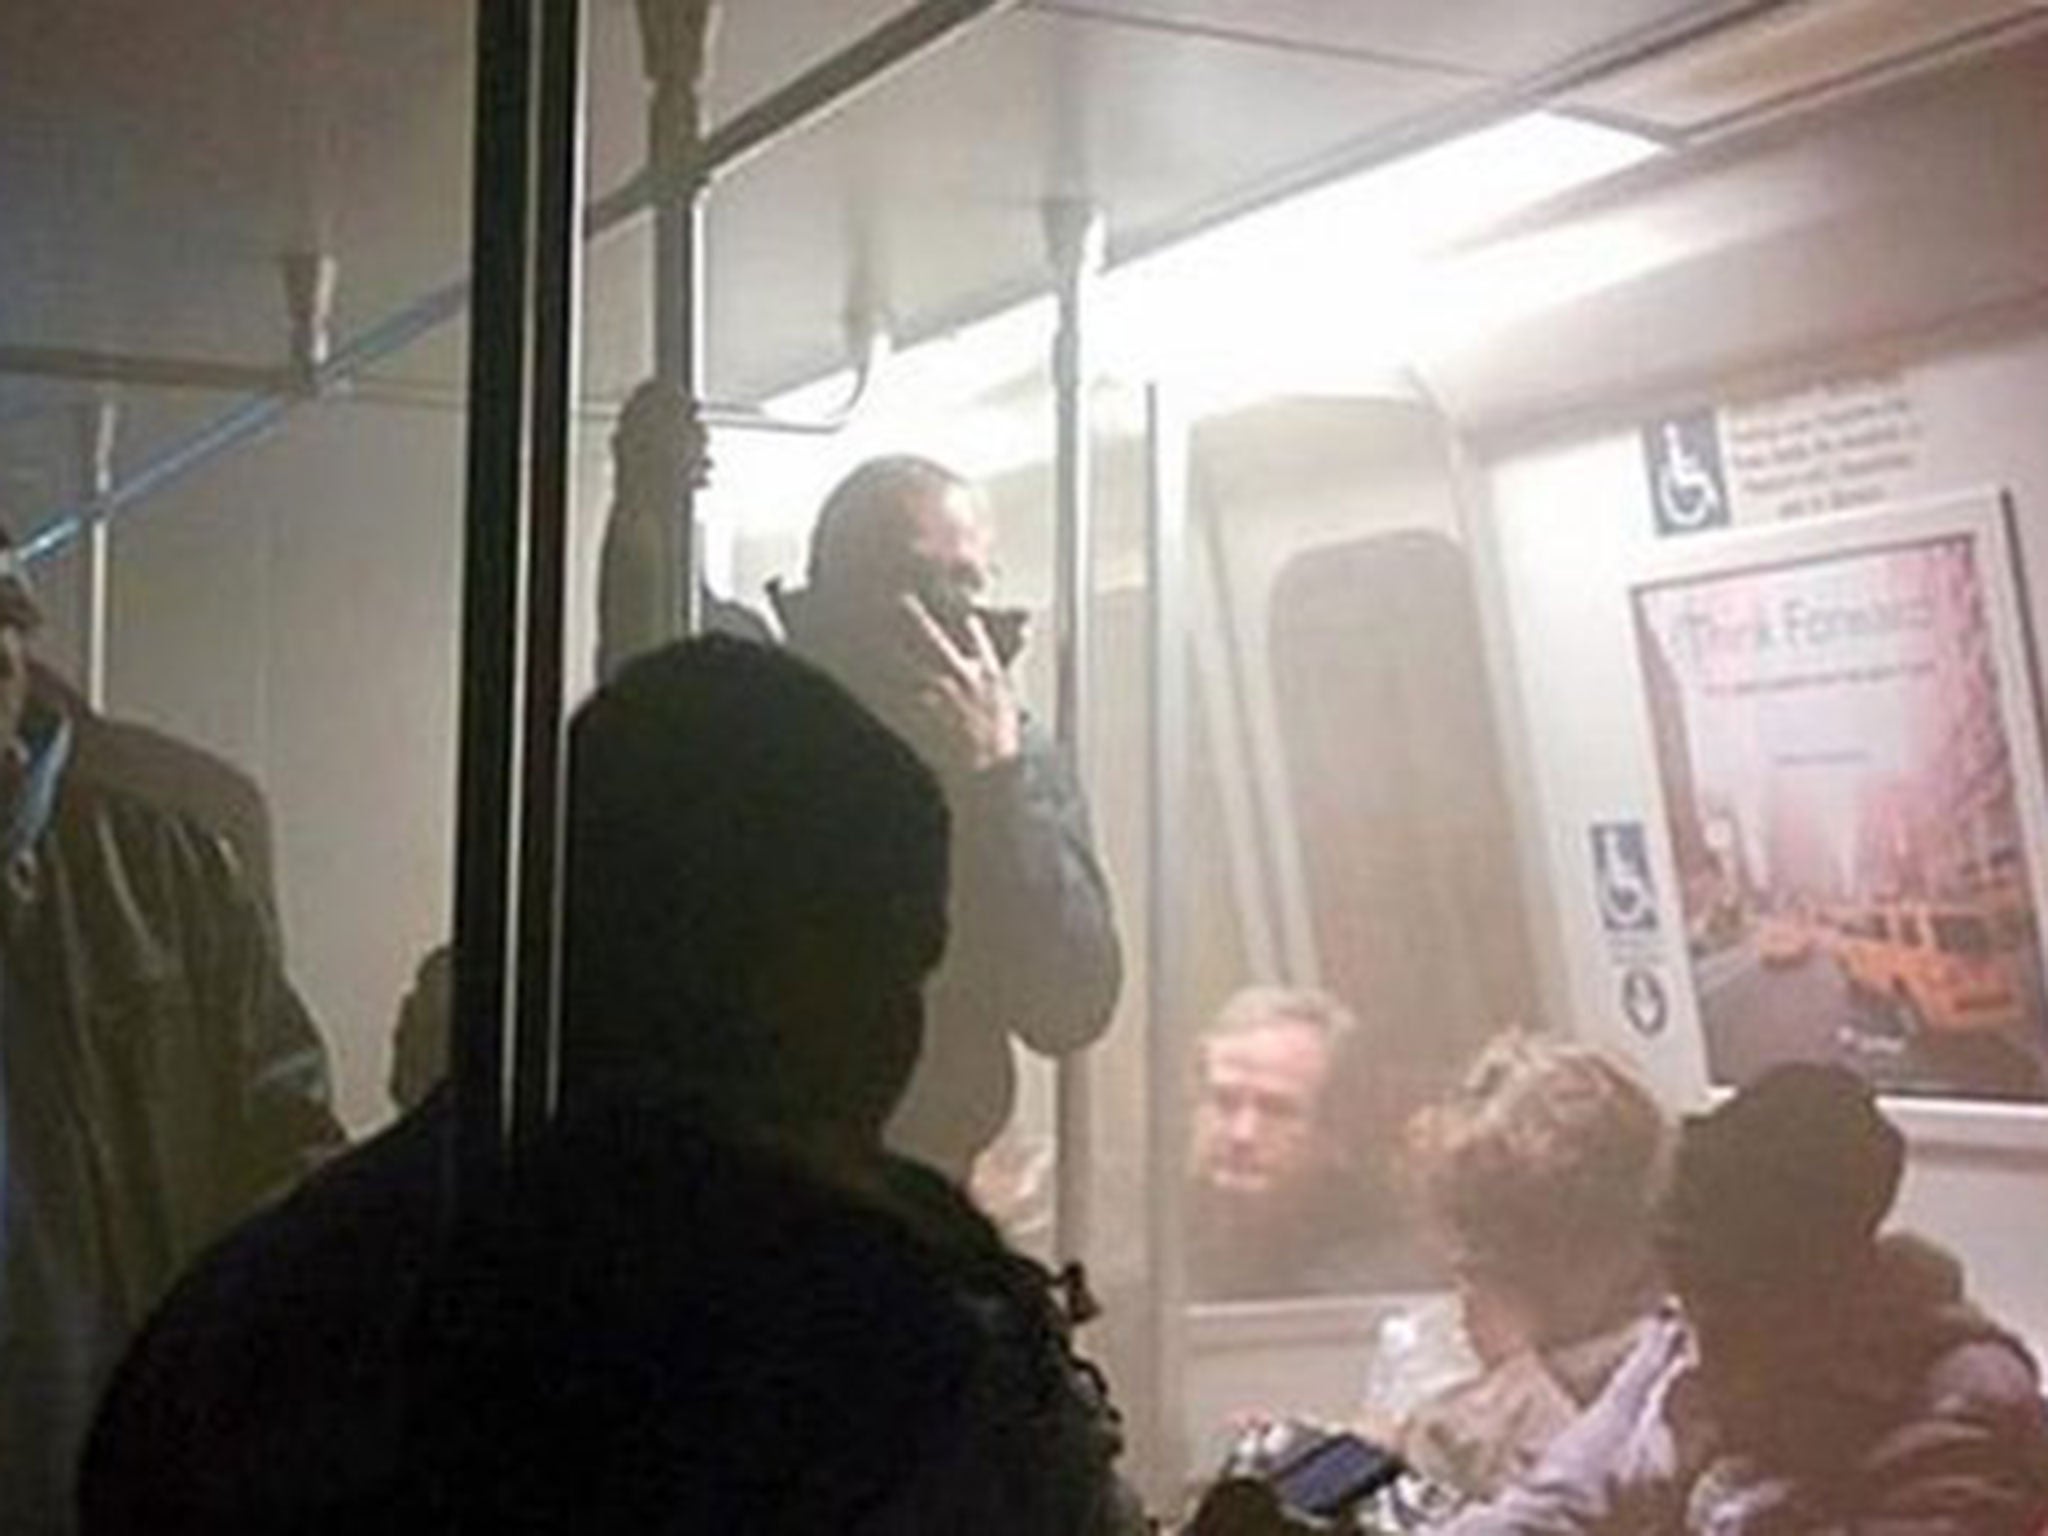 Reports said that a number of passengers had passed out due to smoke inhalation